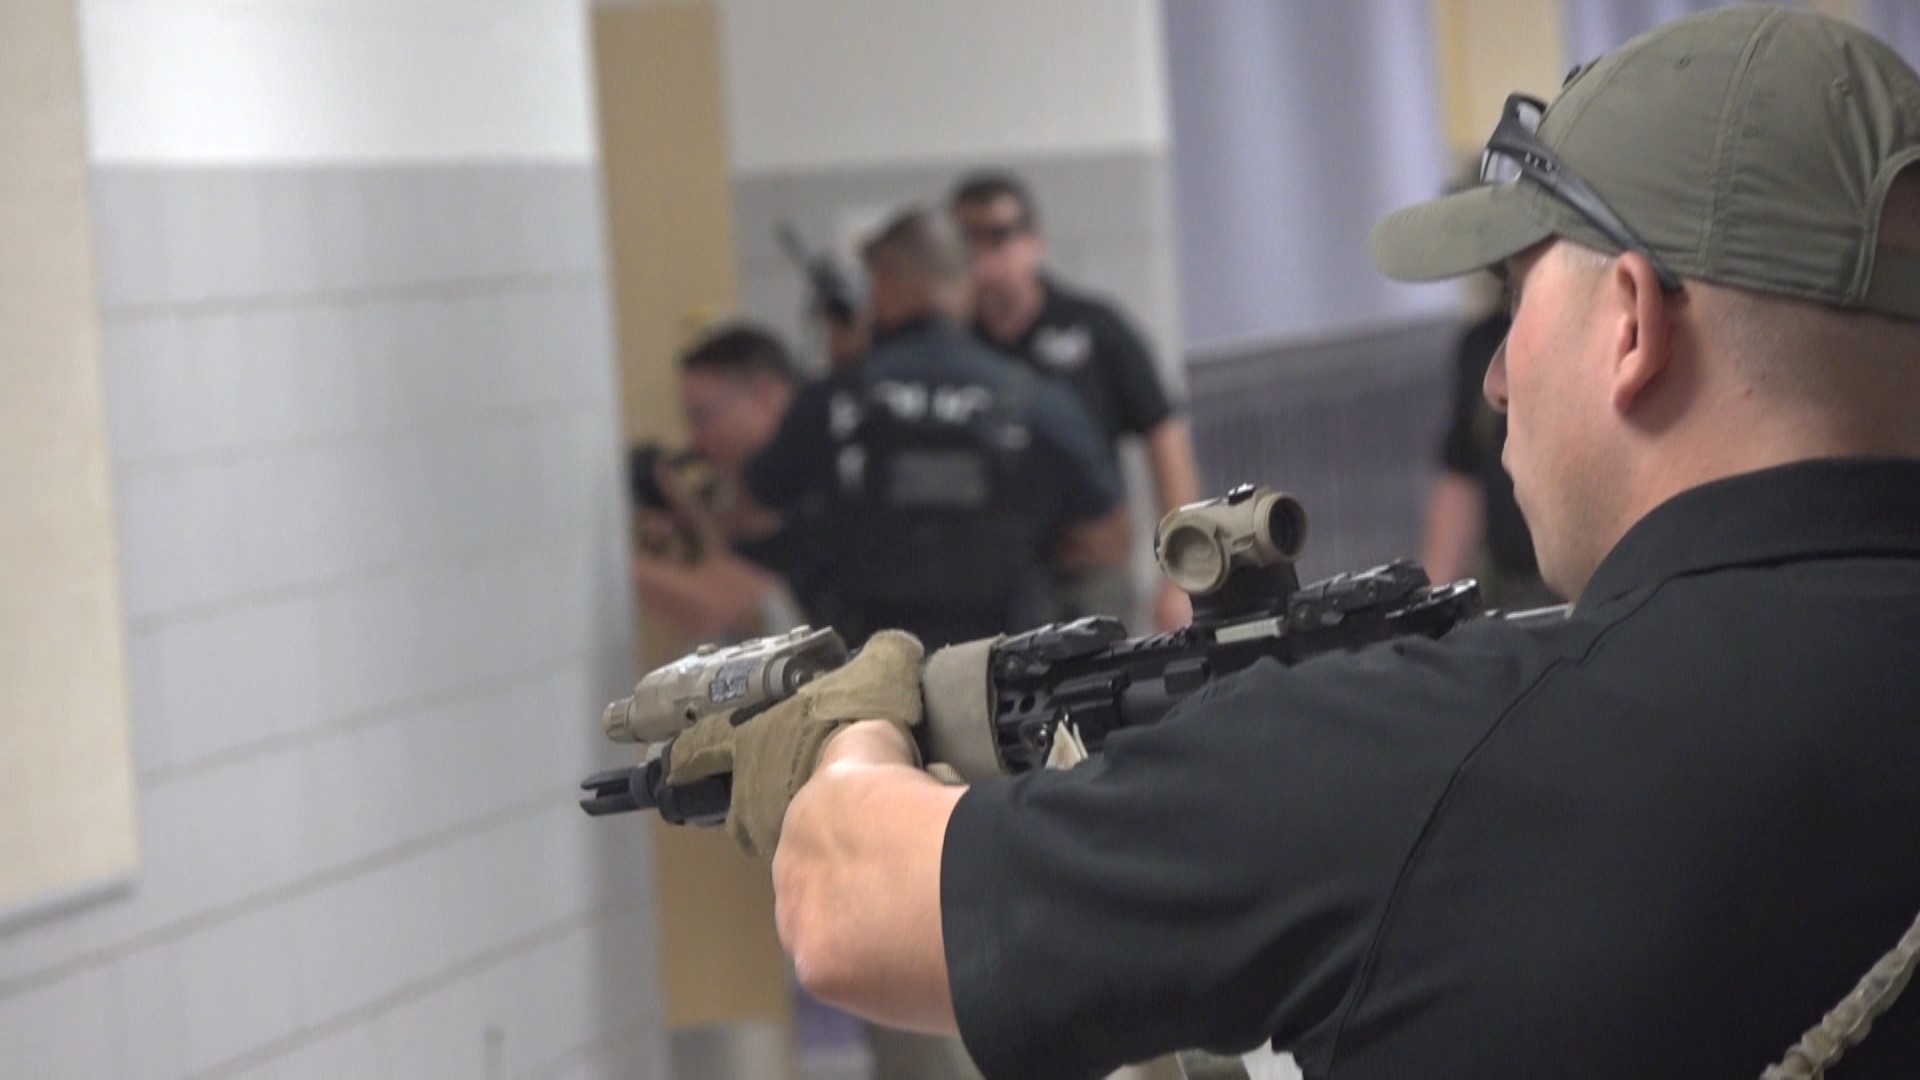 Homeland Security Investigations El Paso Special Response Team led an active shooter training for Crane PD, Crane County Sherriff's Office, DPS and more.